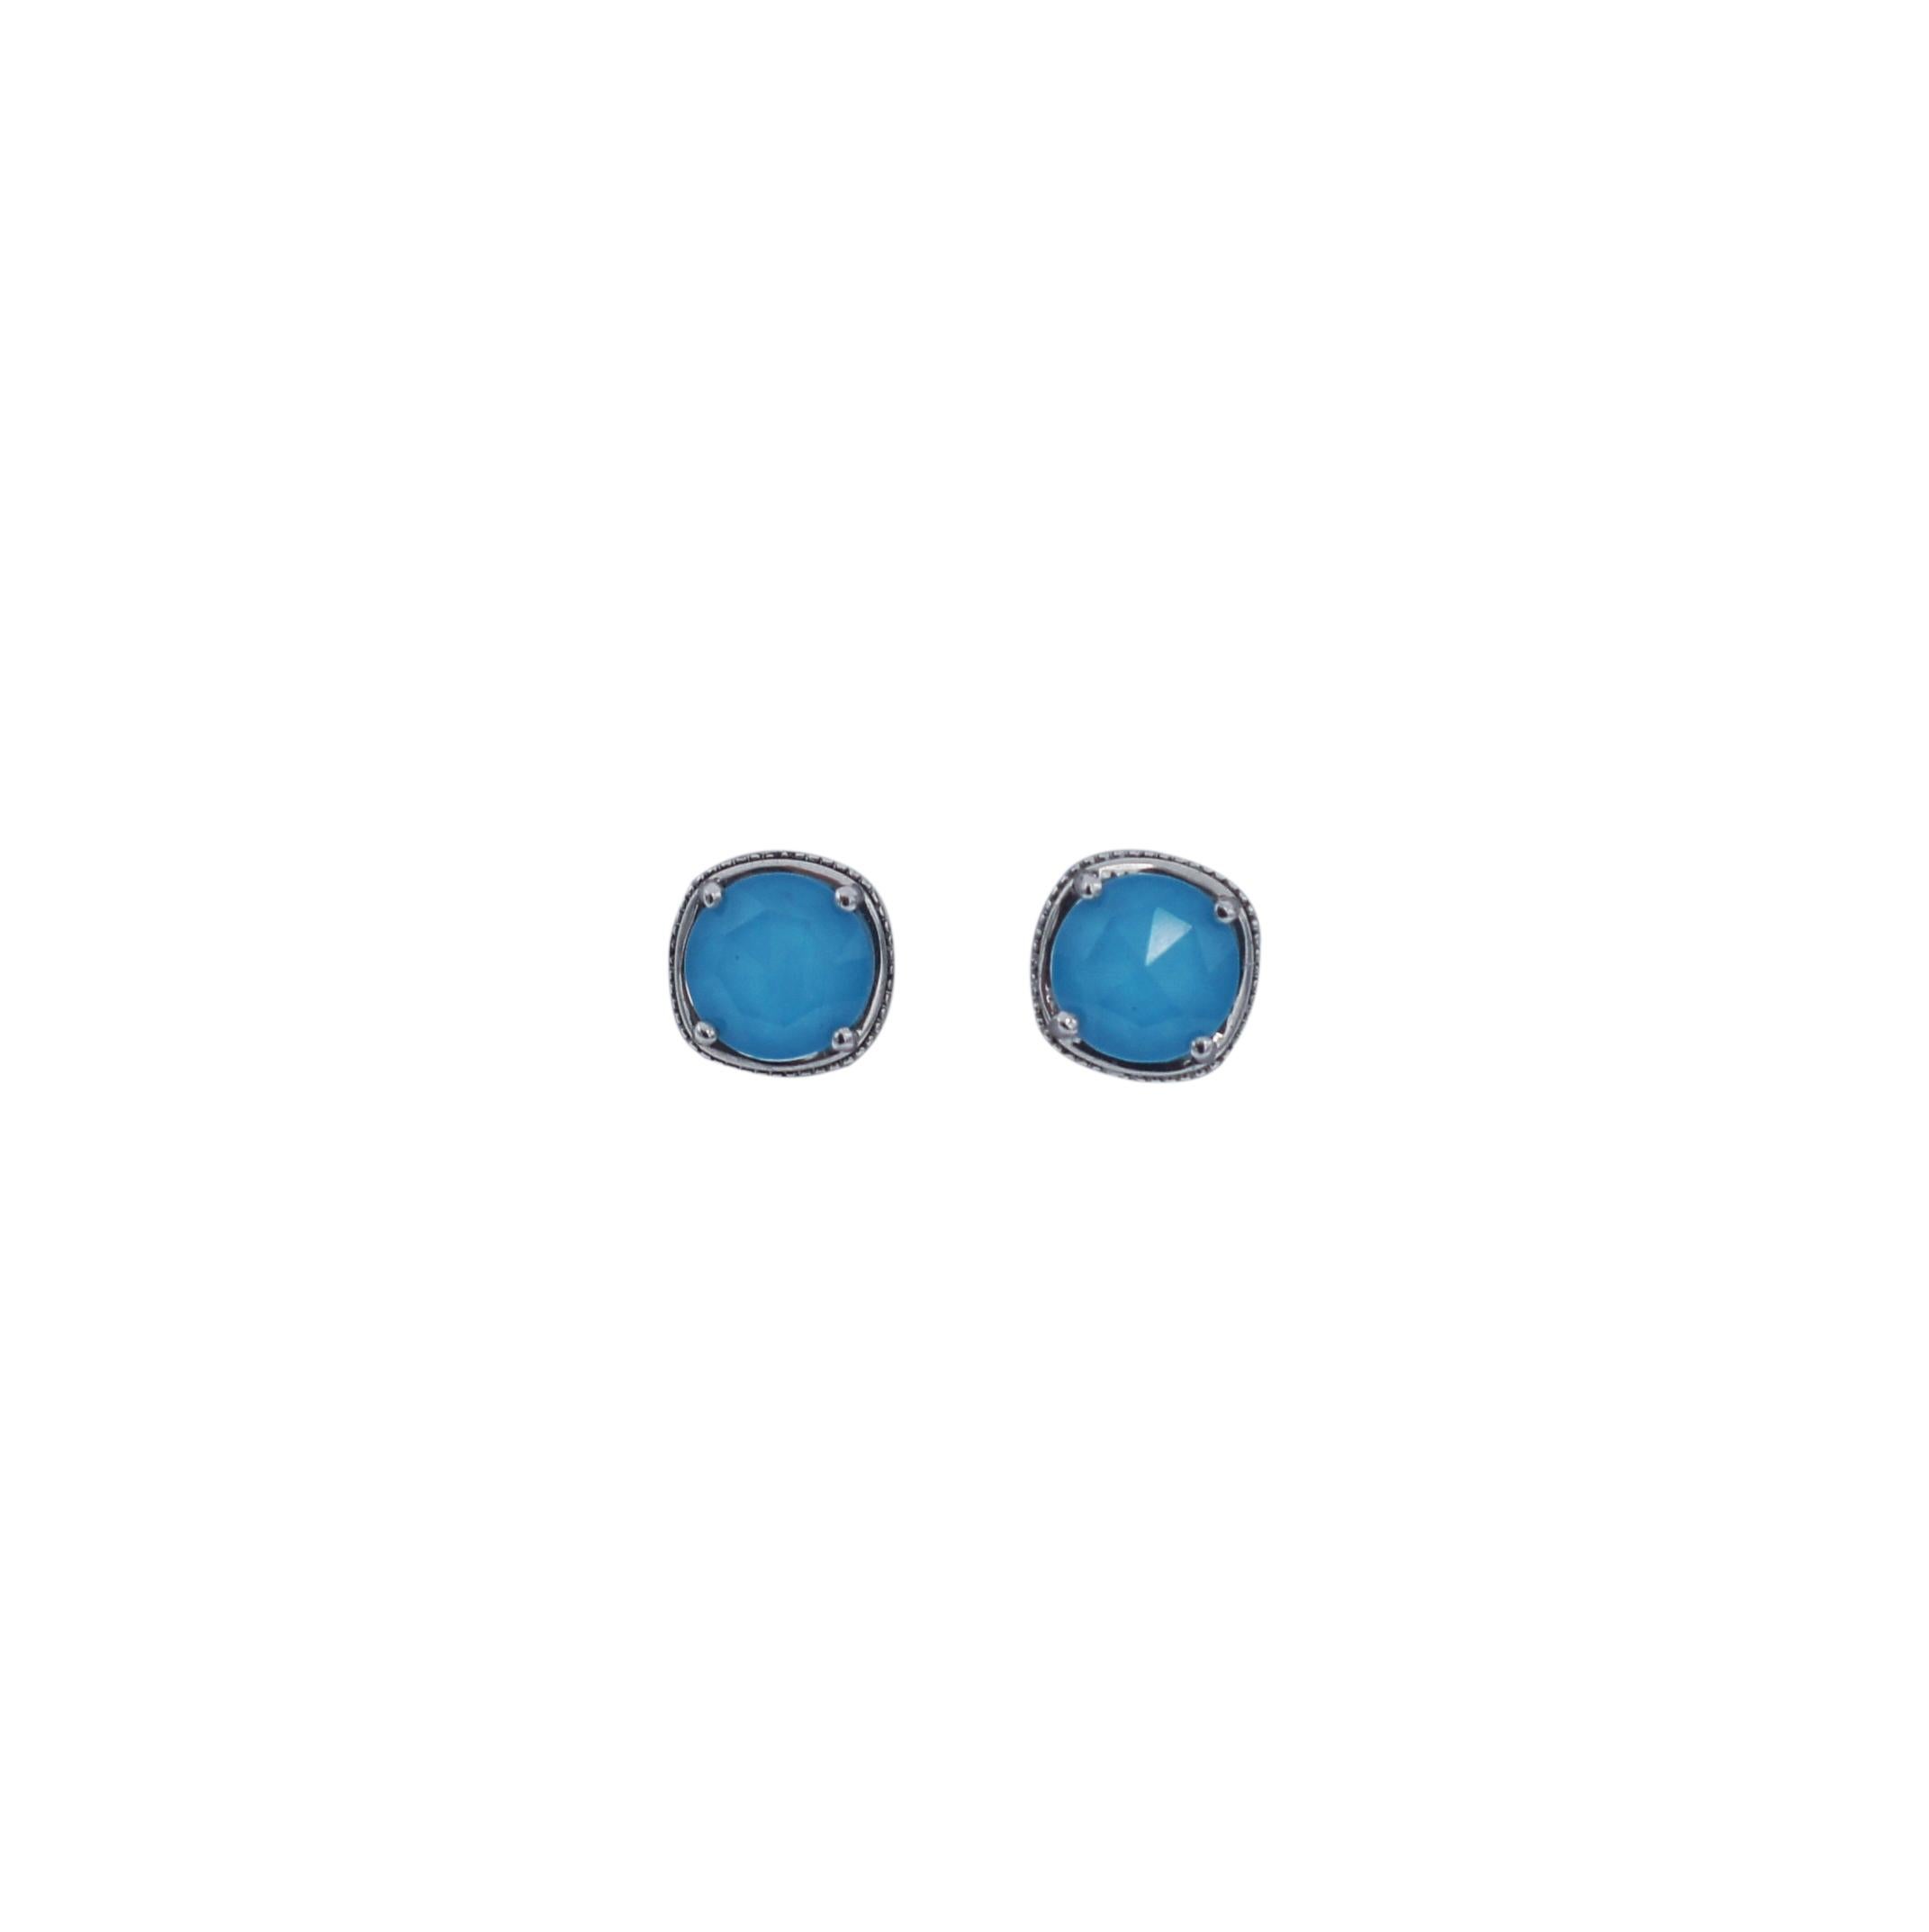 TACORI 925 Silver 18K Turquoise Gemma Bloom Petite Stud Earrings
TACORI
Gemma Bloom
Petite Stud Earrings
Style SE15405
Neo-Turquoise Gem Stone
Approx. 2.80 carat weight
measures: .35